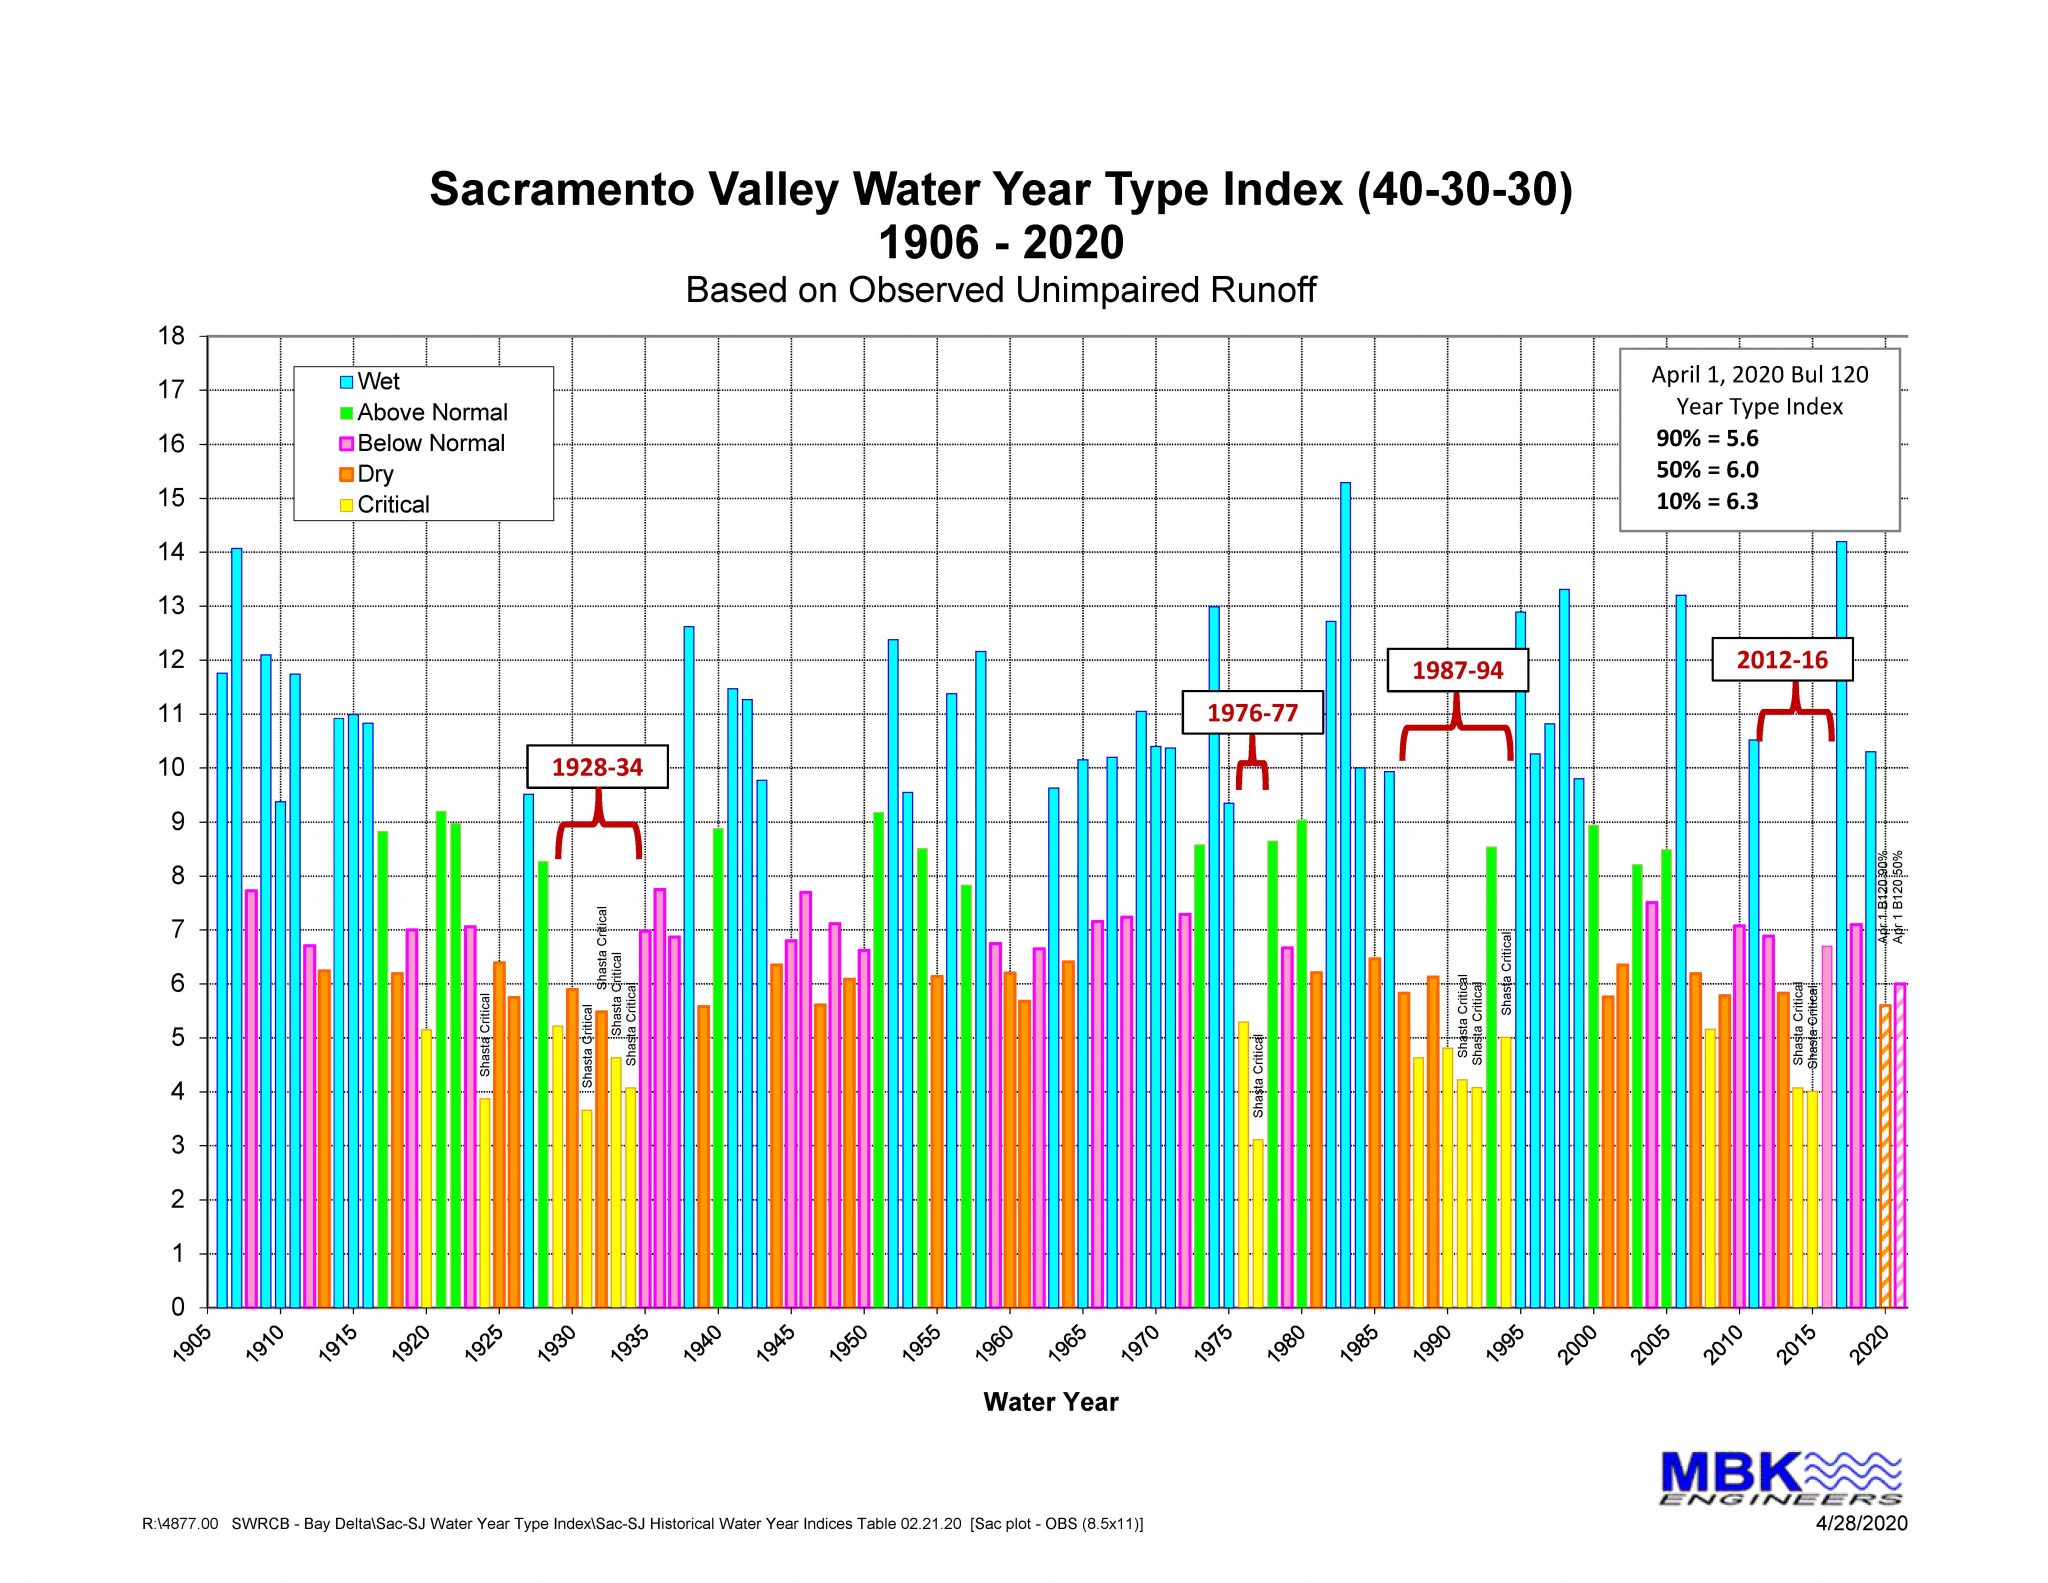 The Water Year in the Sacramento Valley Northern California Water